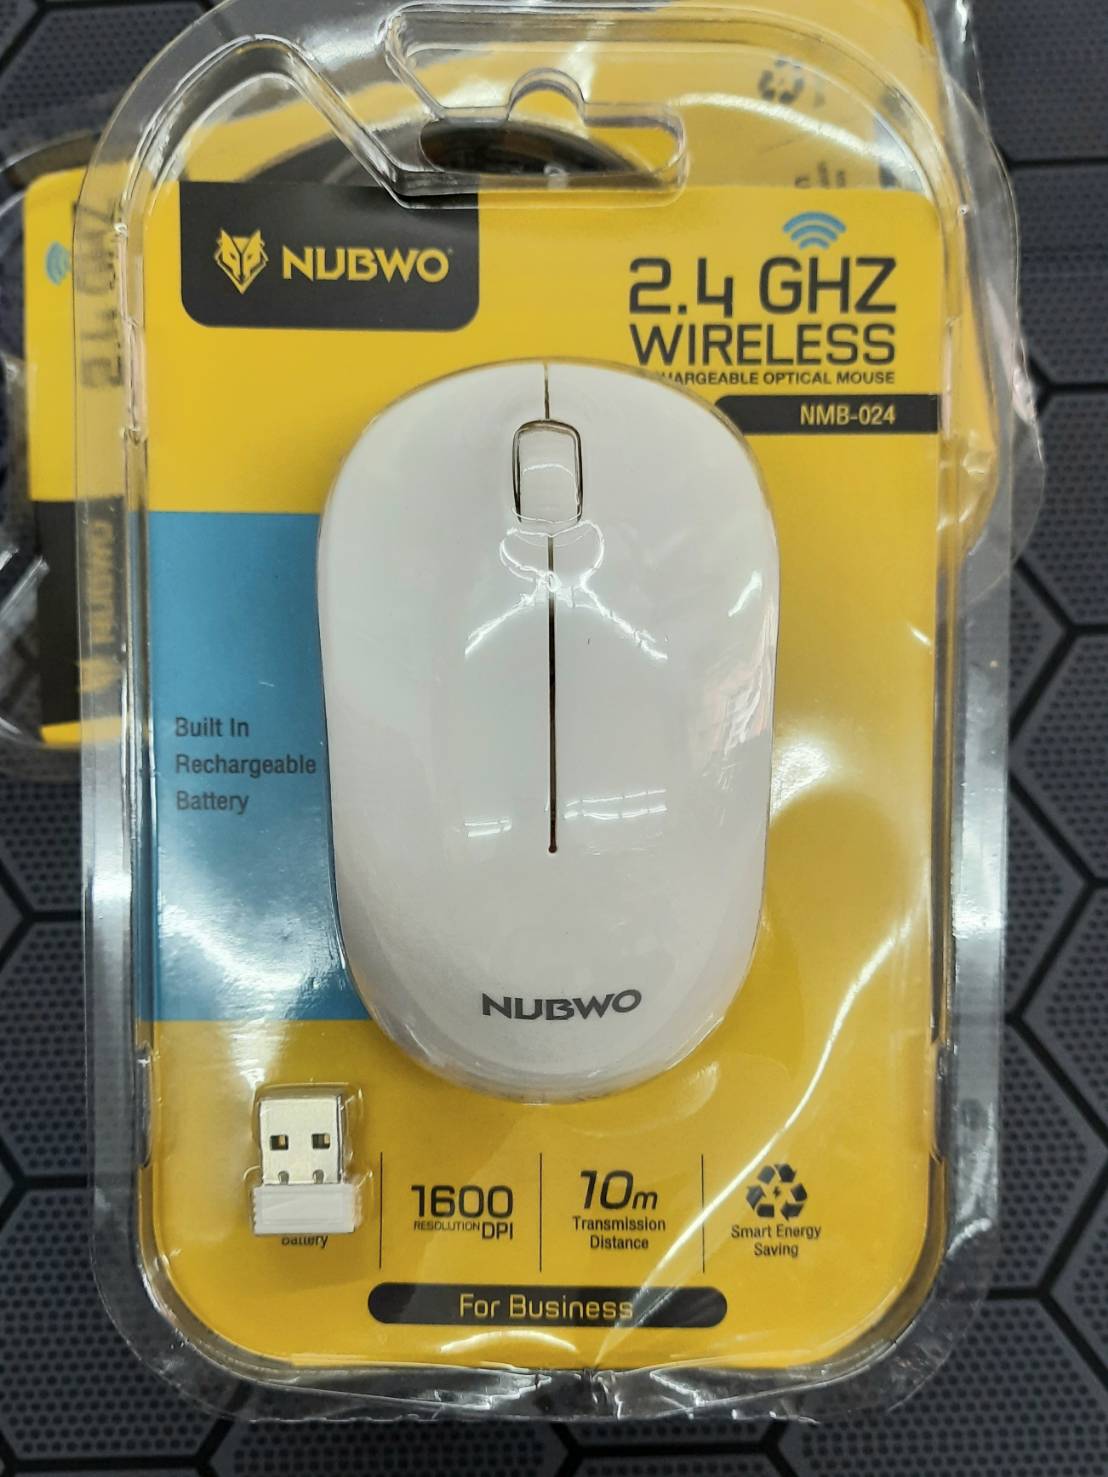 MOUSE WIRELESS NMB-024 NUBWO 2.4GHz  wireless transmission technolongy 10 meter Optical mouse 1600DPI Power by 1xAAA battery